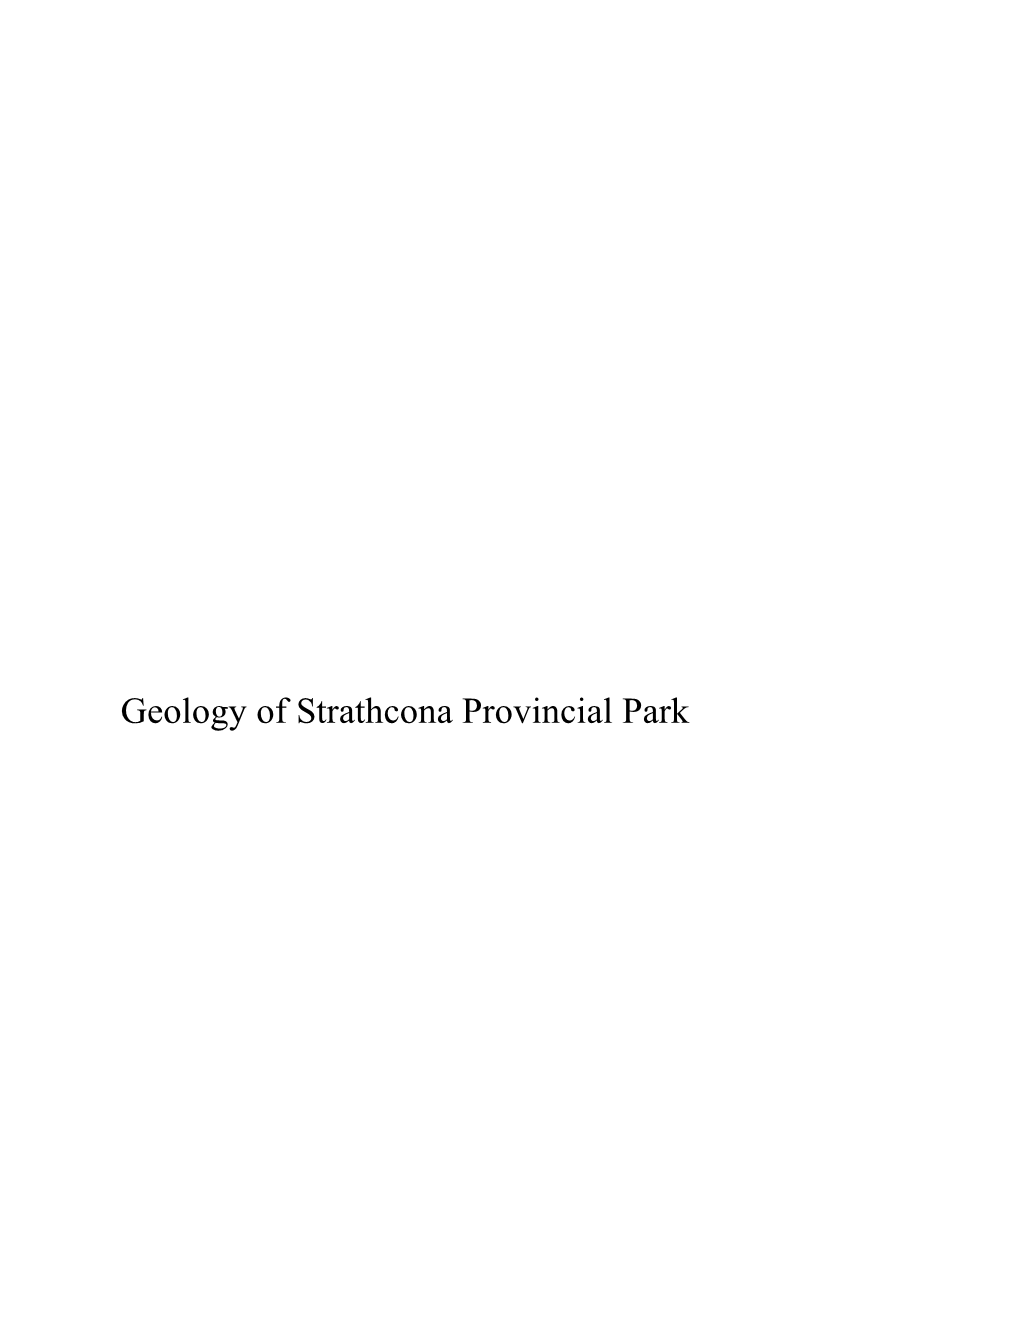 Geology of Strathcona Provincial Park